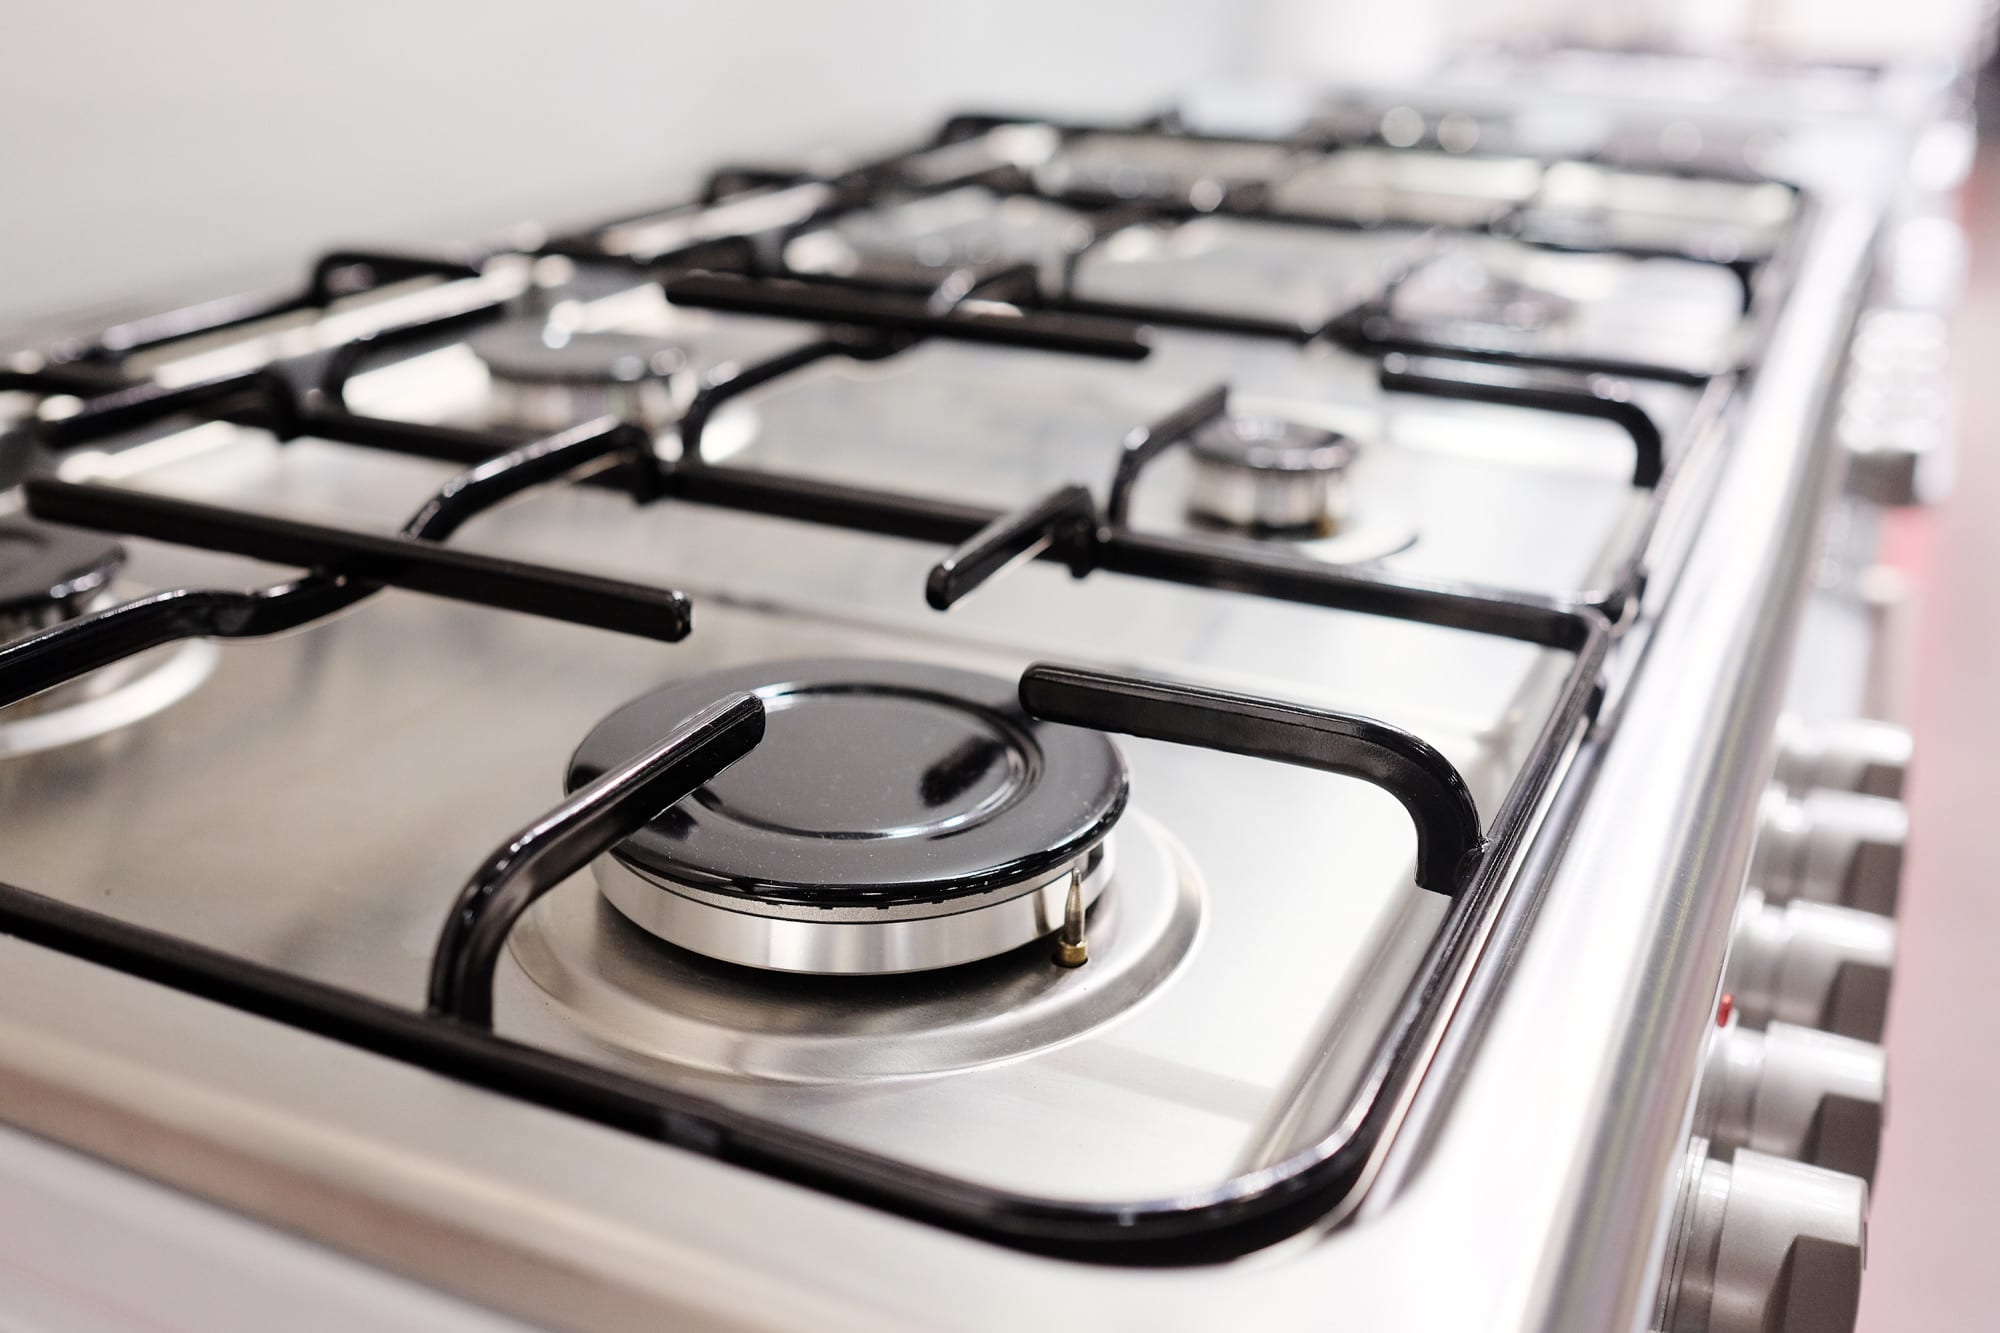 Should You Get a Gas Stove or an Electric Stove?